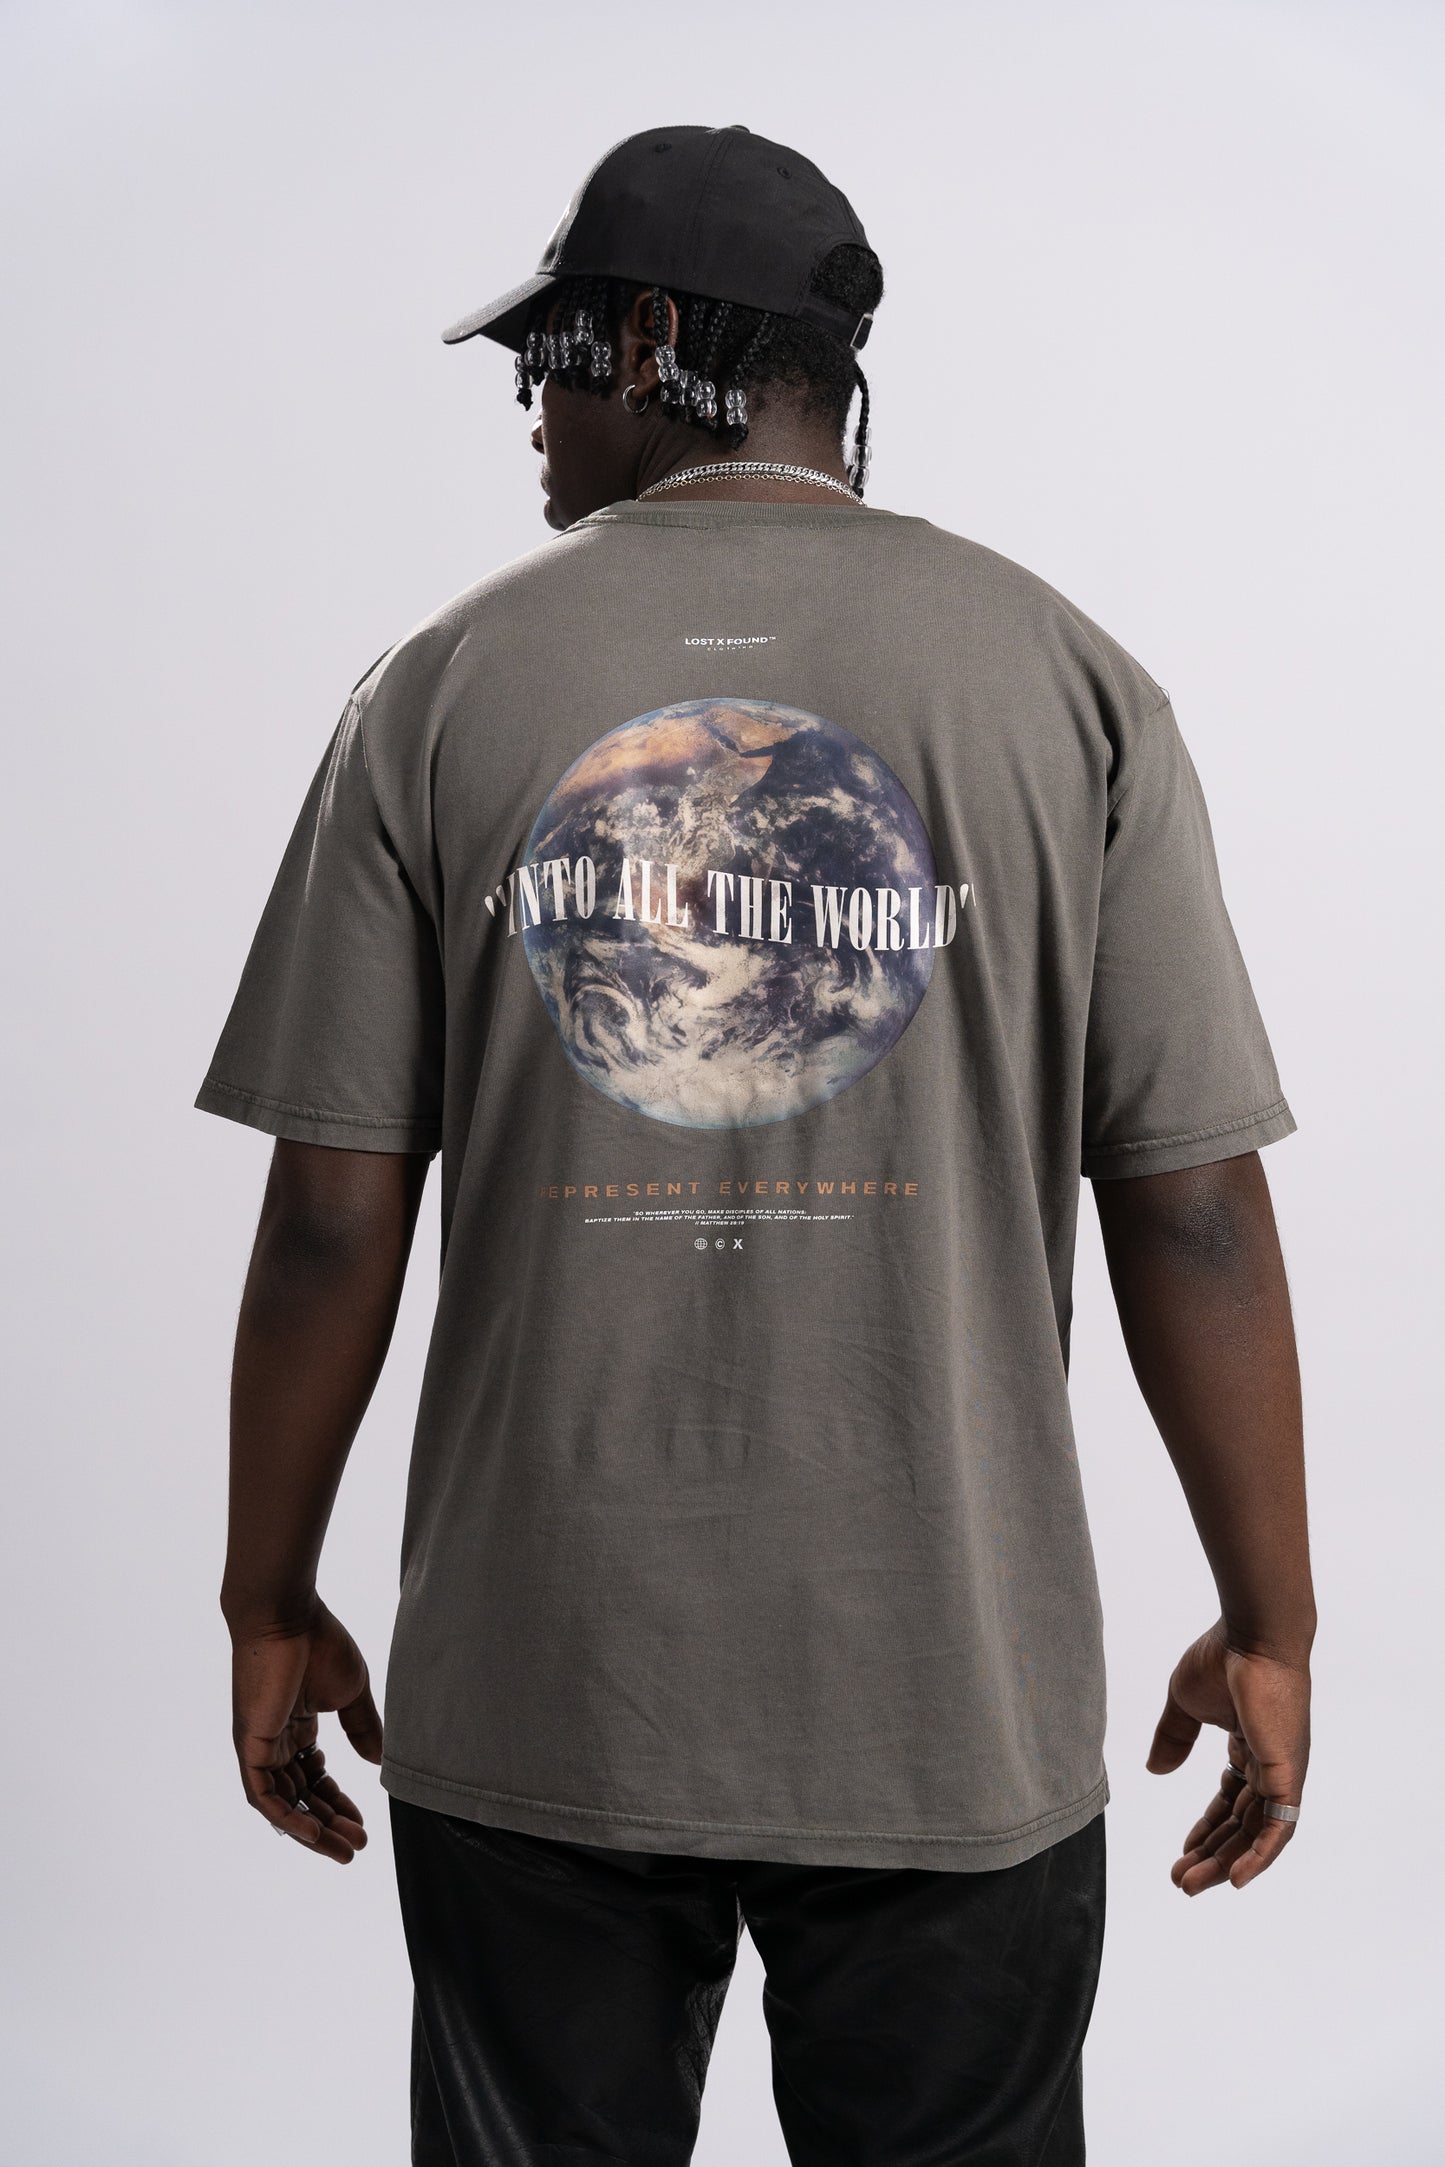 OVERSIZED TEE V2 "INTO ALL THE WORLD"